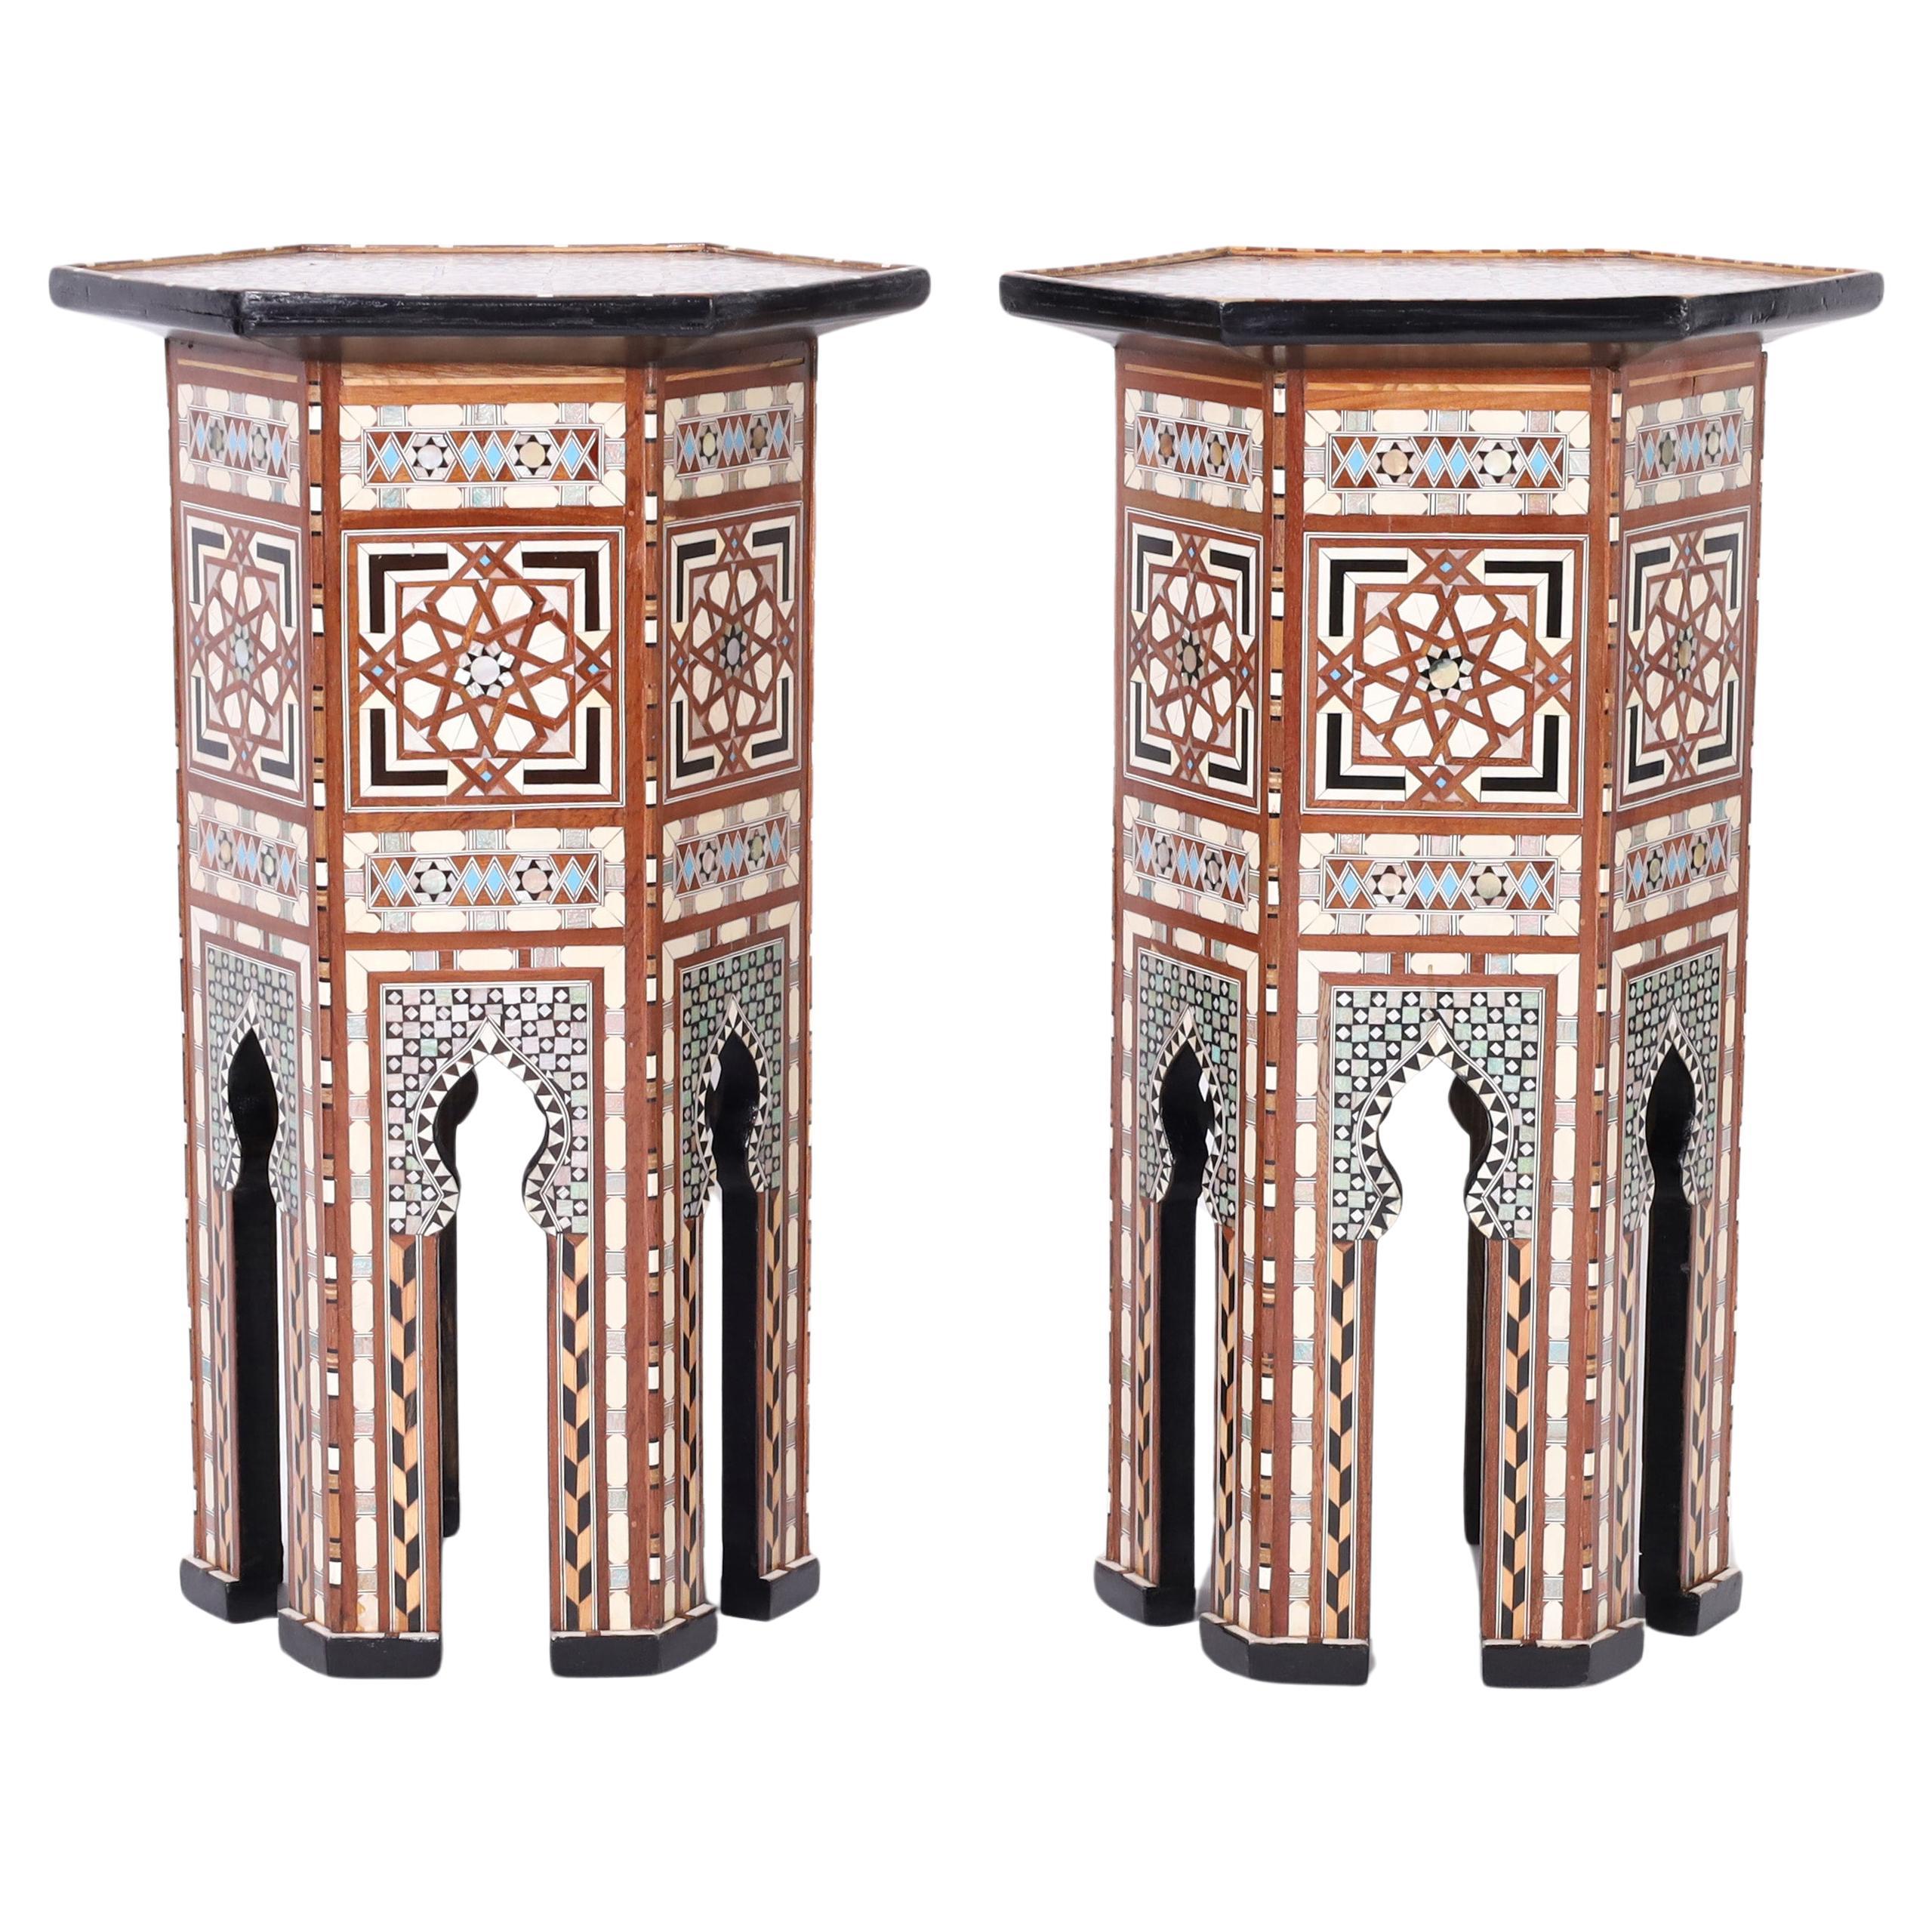  Pair of Moroccan Stands or Tables For Sale